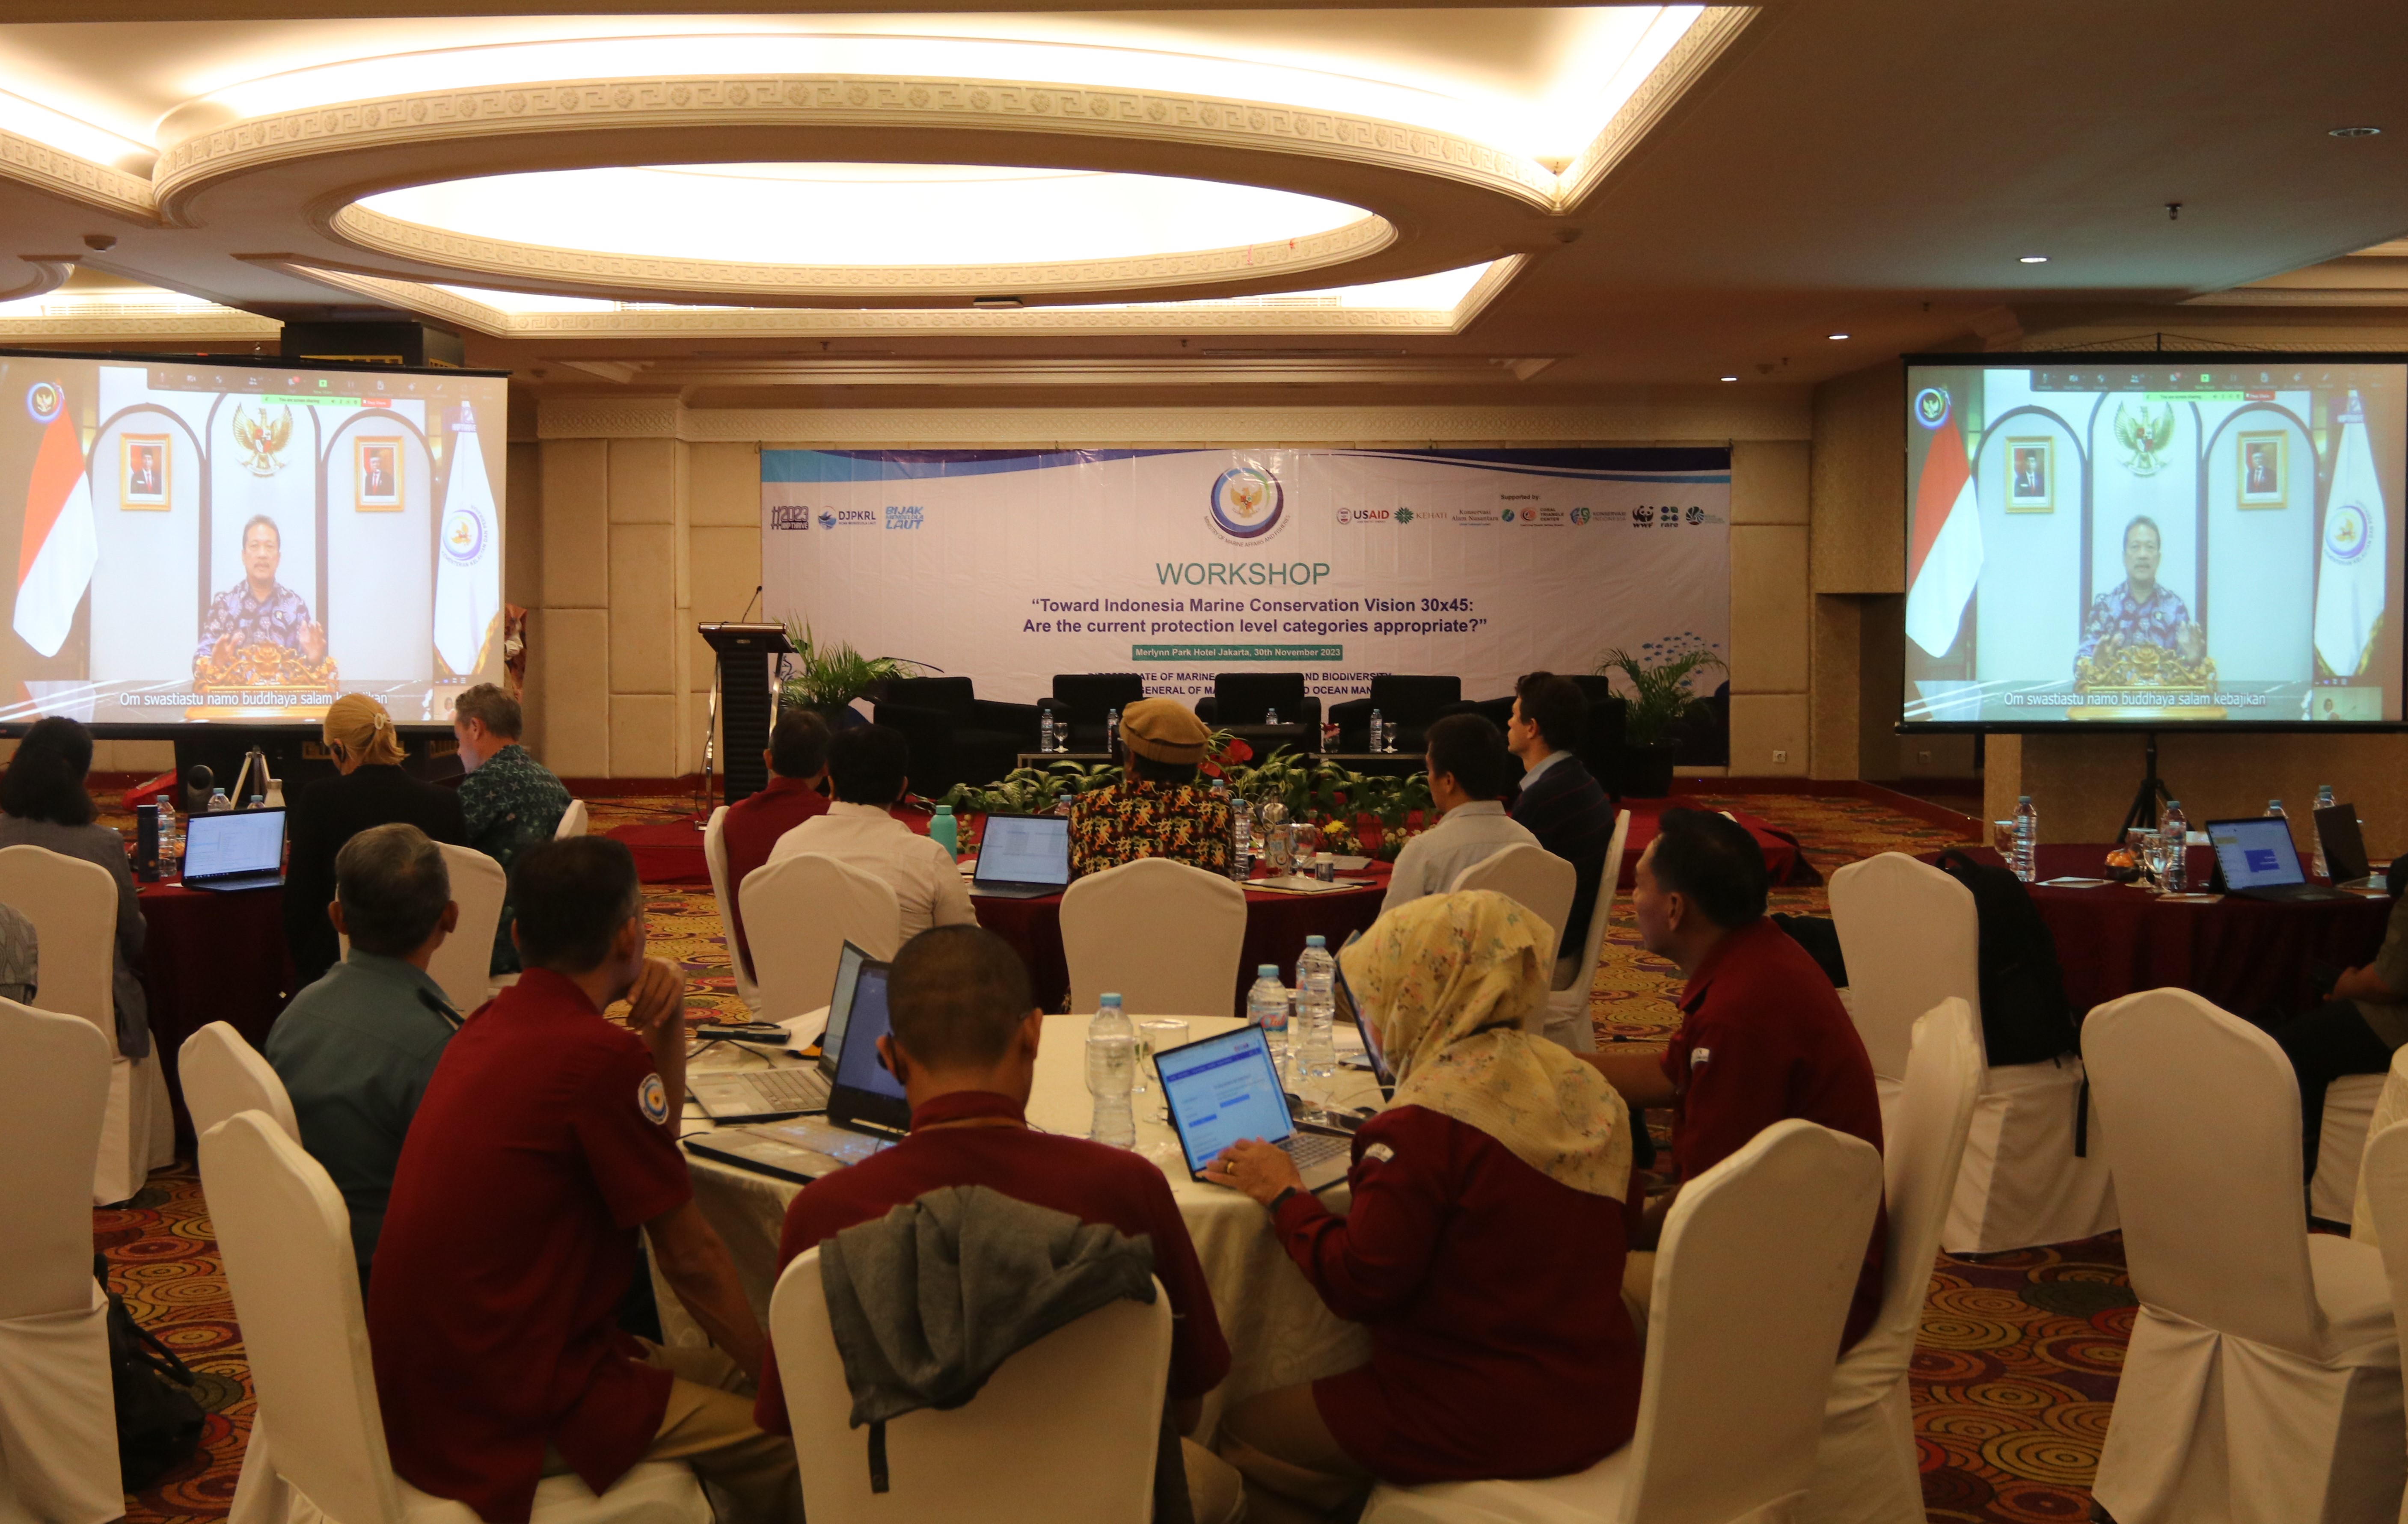 Seminar Internasional ”Towards Indonesia Marine Conservation Vision 30by45: Are the current protection level categories appropriate?”, Jakarta (30/11).